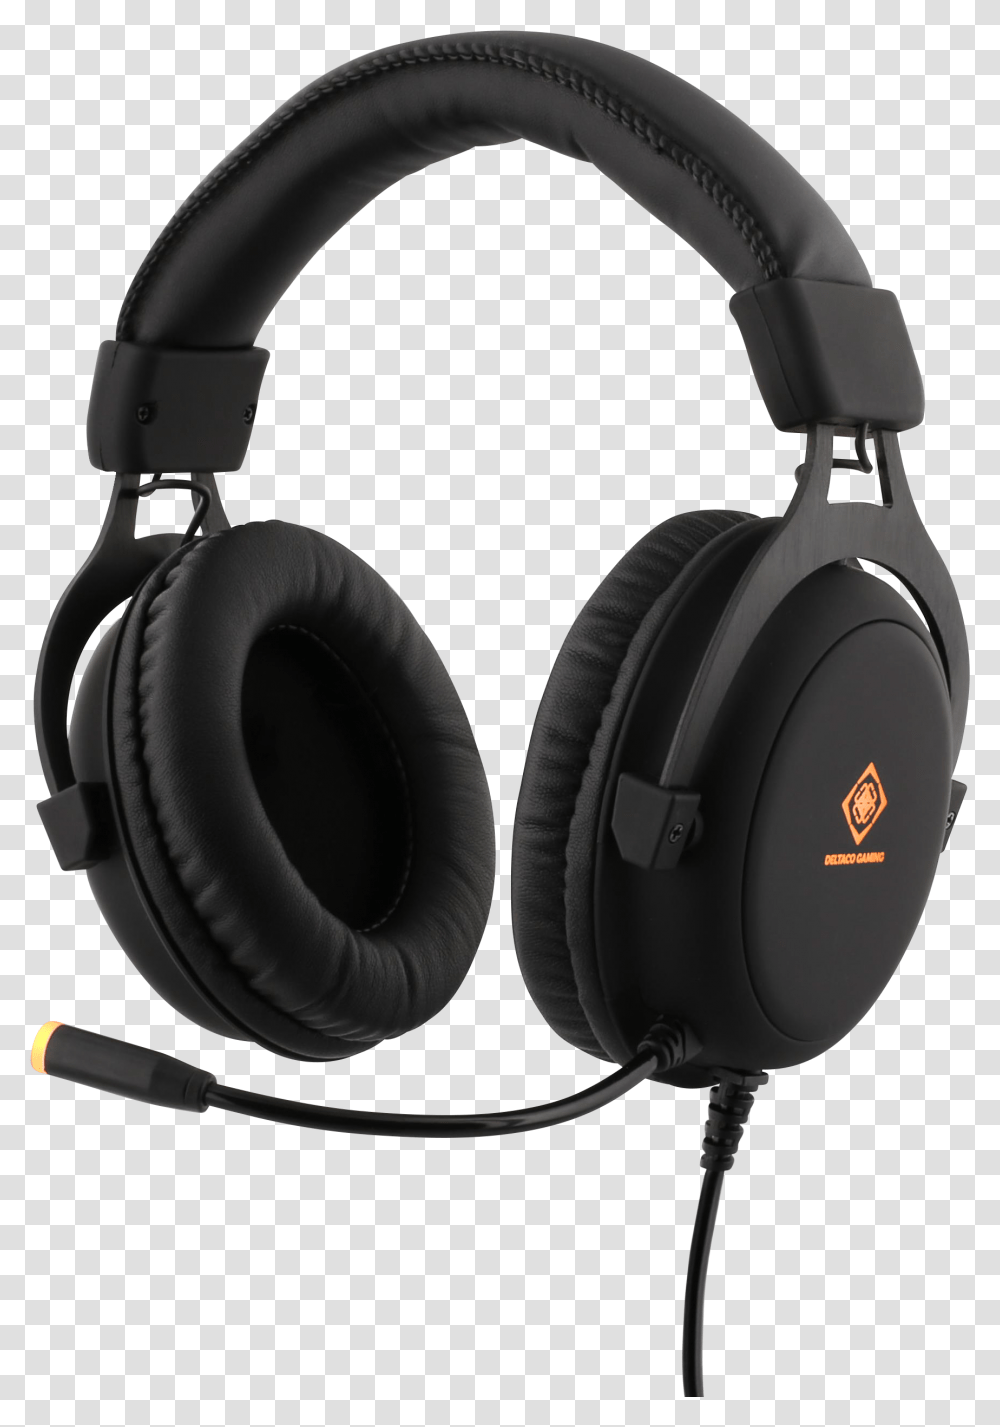 Headphones For Pc In Pakistan, Electronics, Headset Transparent Png